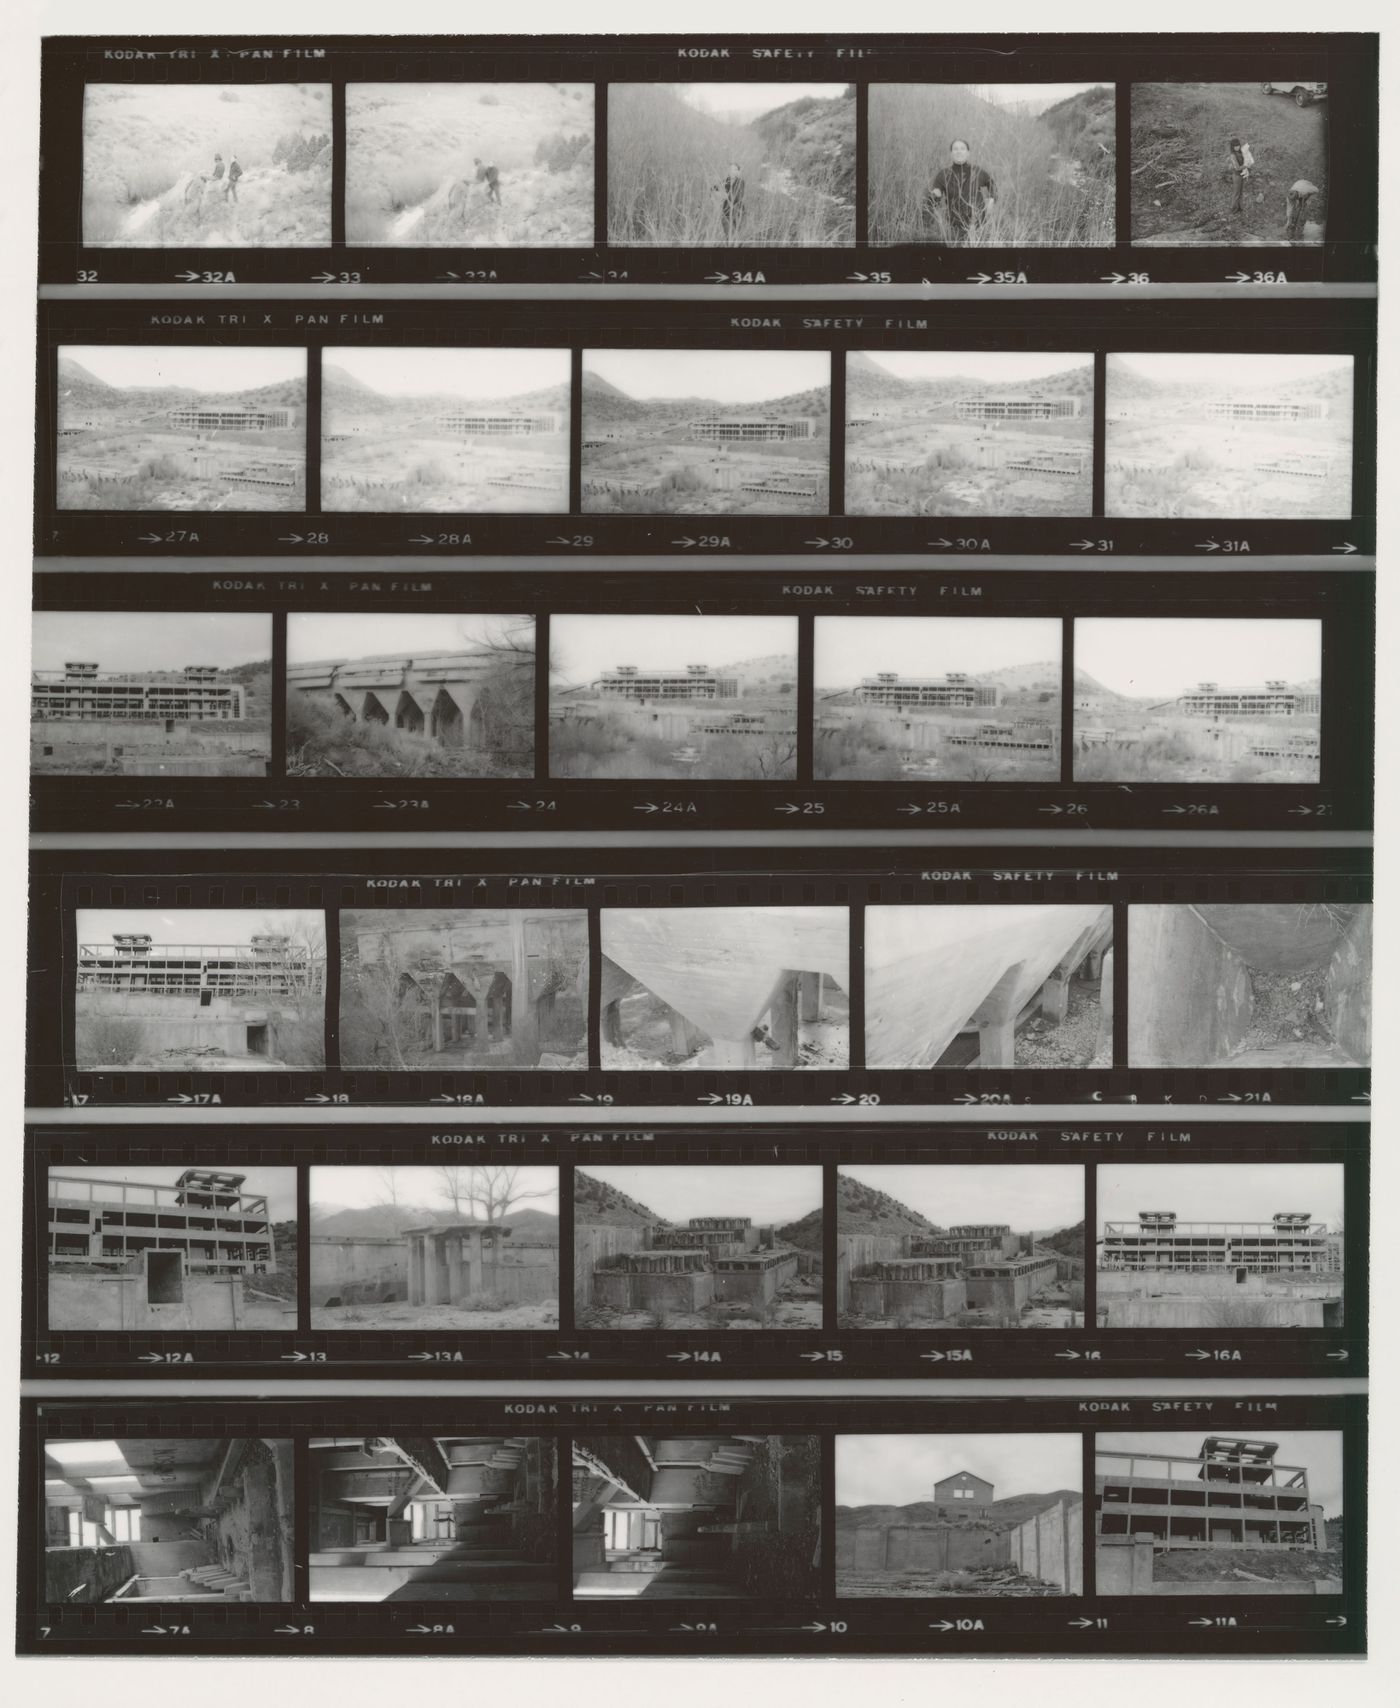 Contact sheet of people, derelict buildings and structures, Western United States